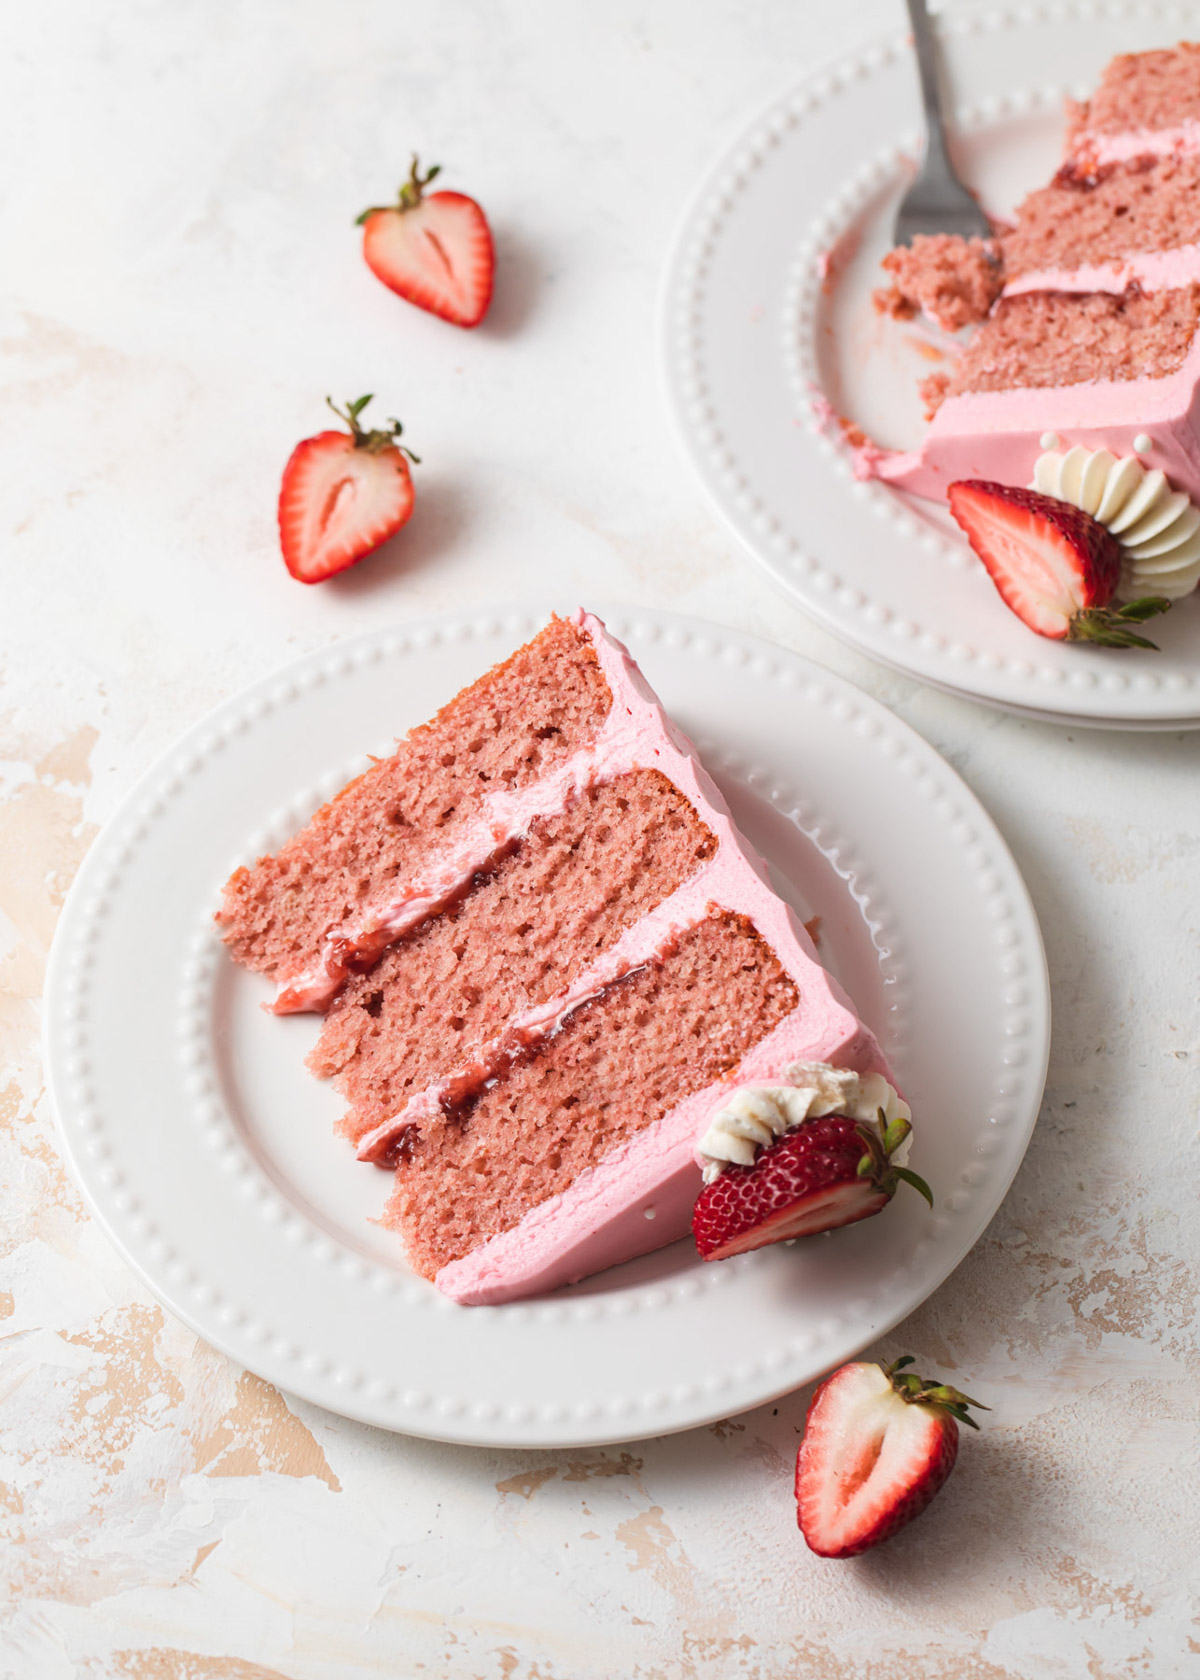 Two slices of pink strawberry cake with jam filling and pink frosting